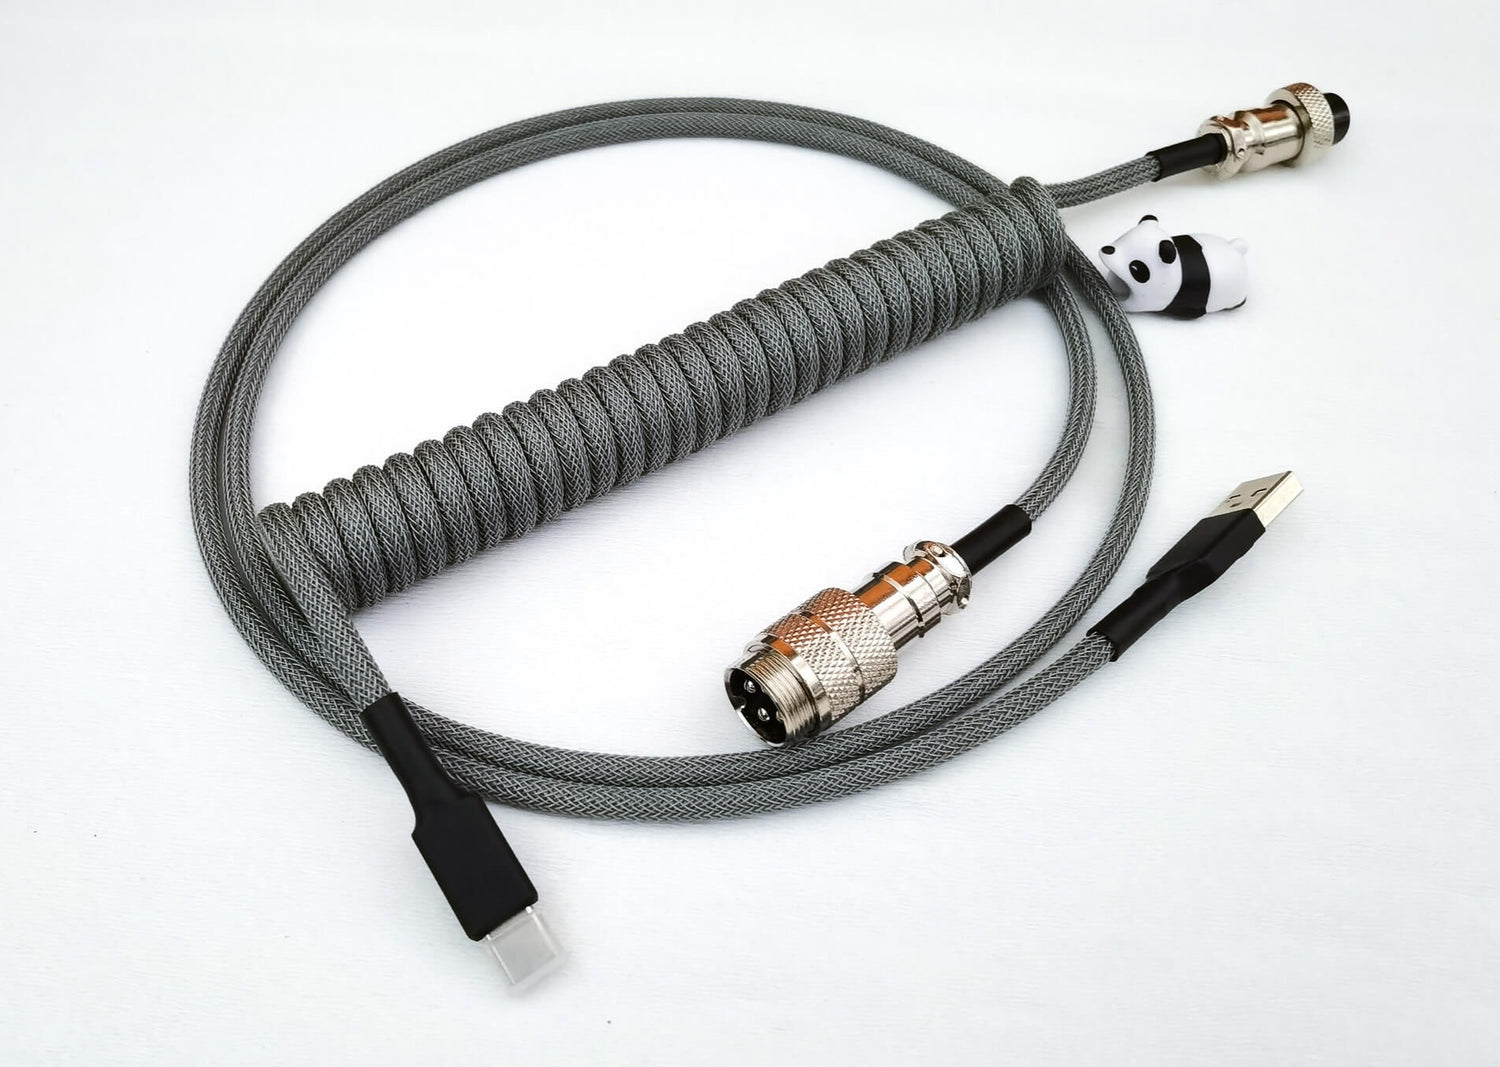 Grey coiled keyboard USB cables